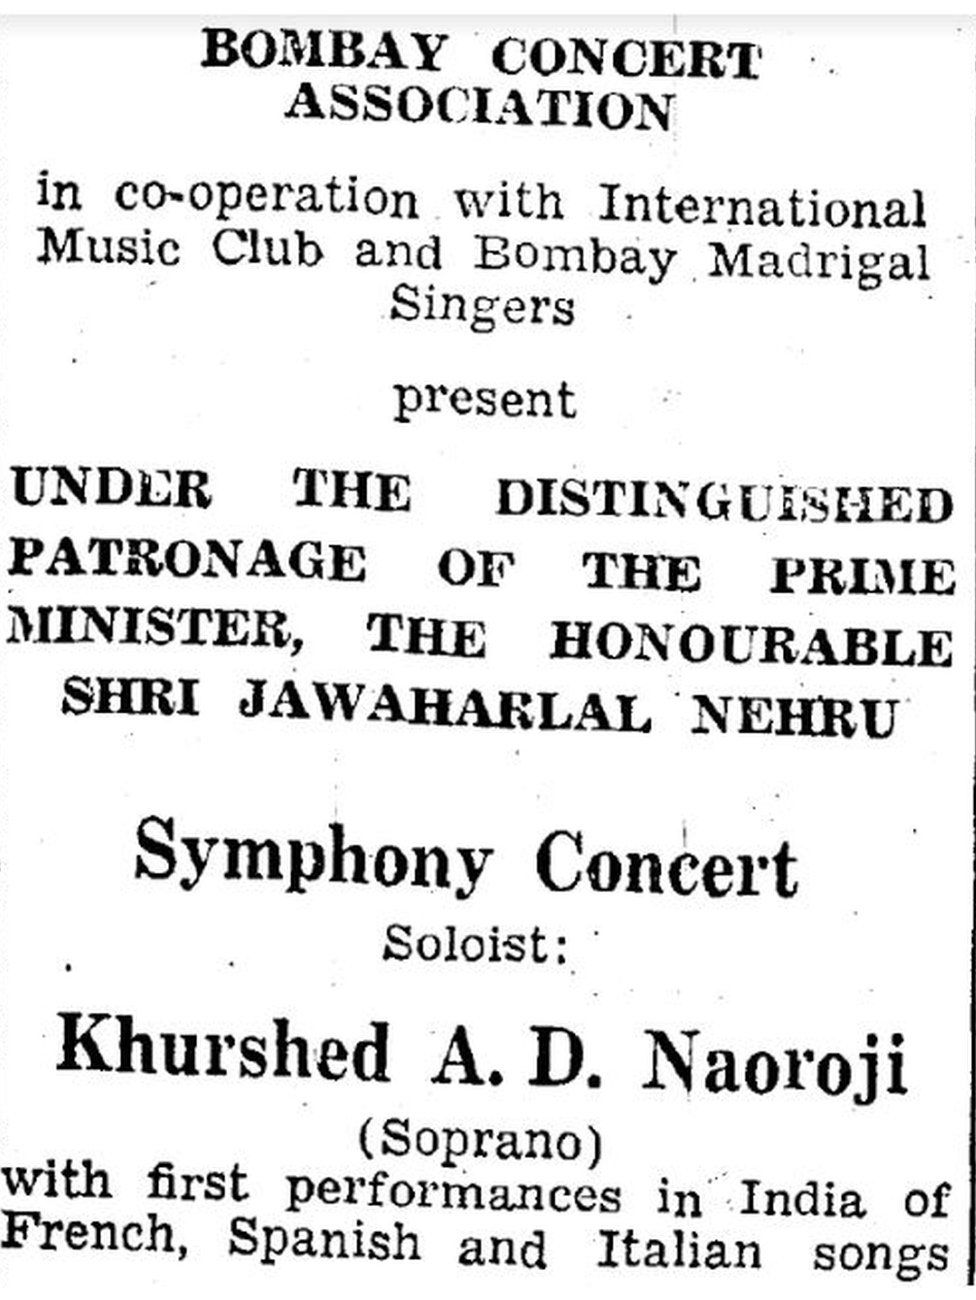 Khurshedben concert advertisement. One of the few surviving sources to document Khurshedben's life after Indian independence. Here, Nehru attends a concert held in Bombay where Khurshedben was a soloist.